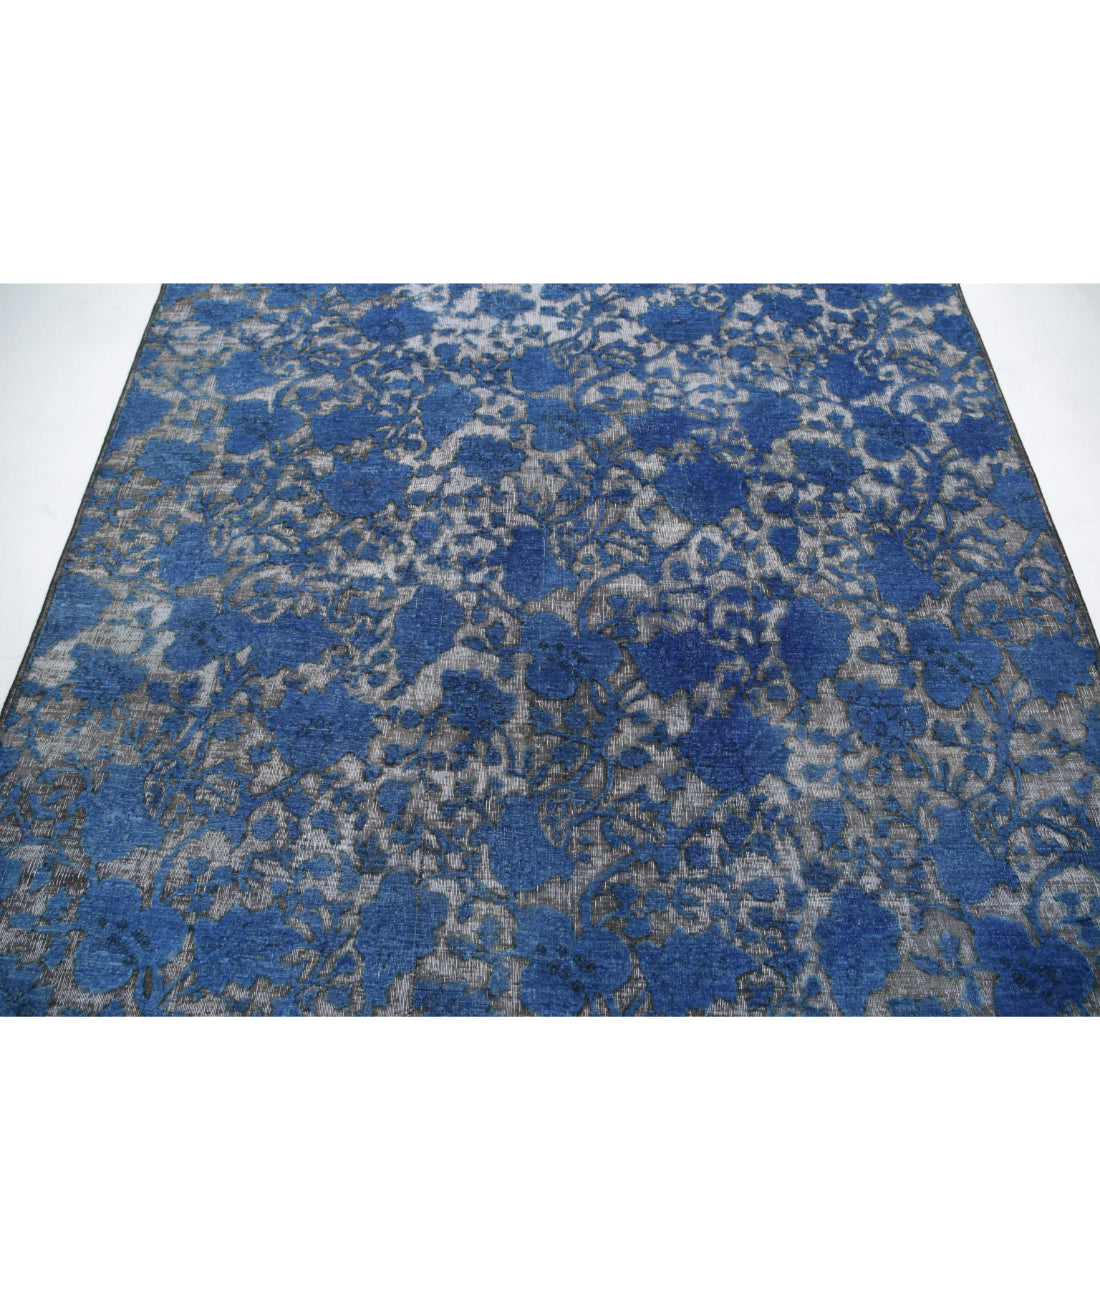 Hand Knotted Onyx Wool Rug - 6'5'' x 6'4'' 6'5'' x 6'4'' (193 X 190) / Blue / Blue